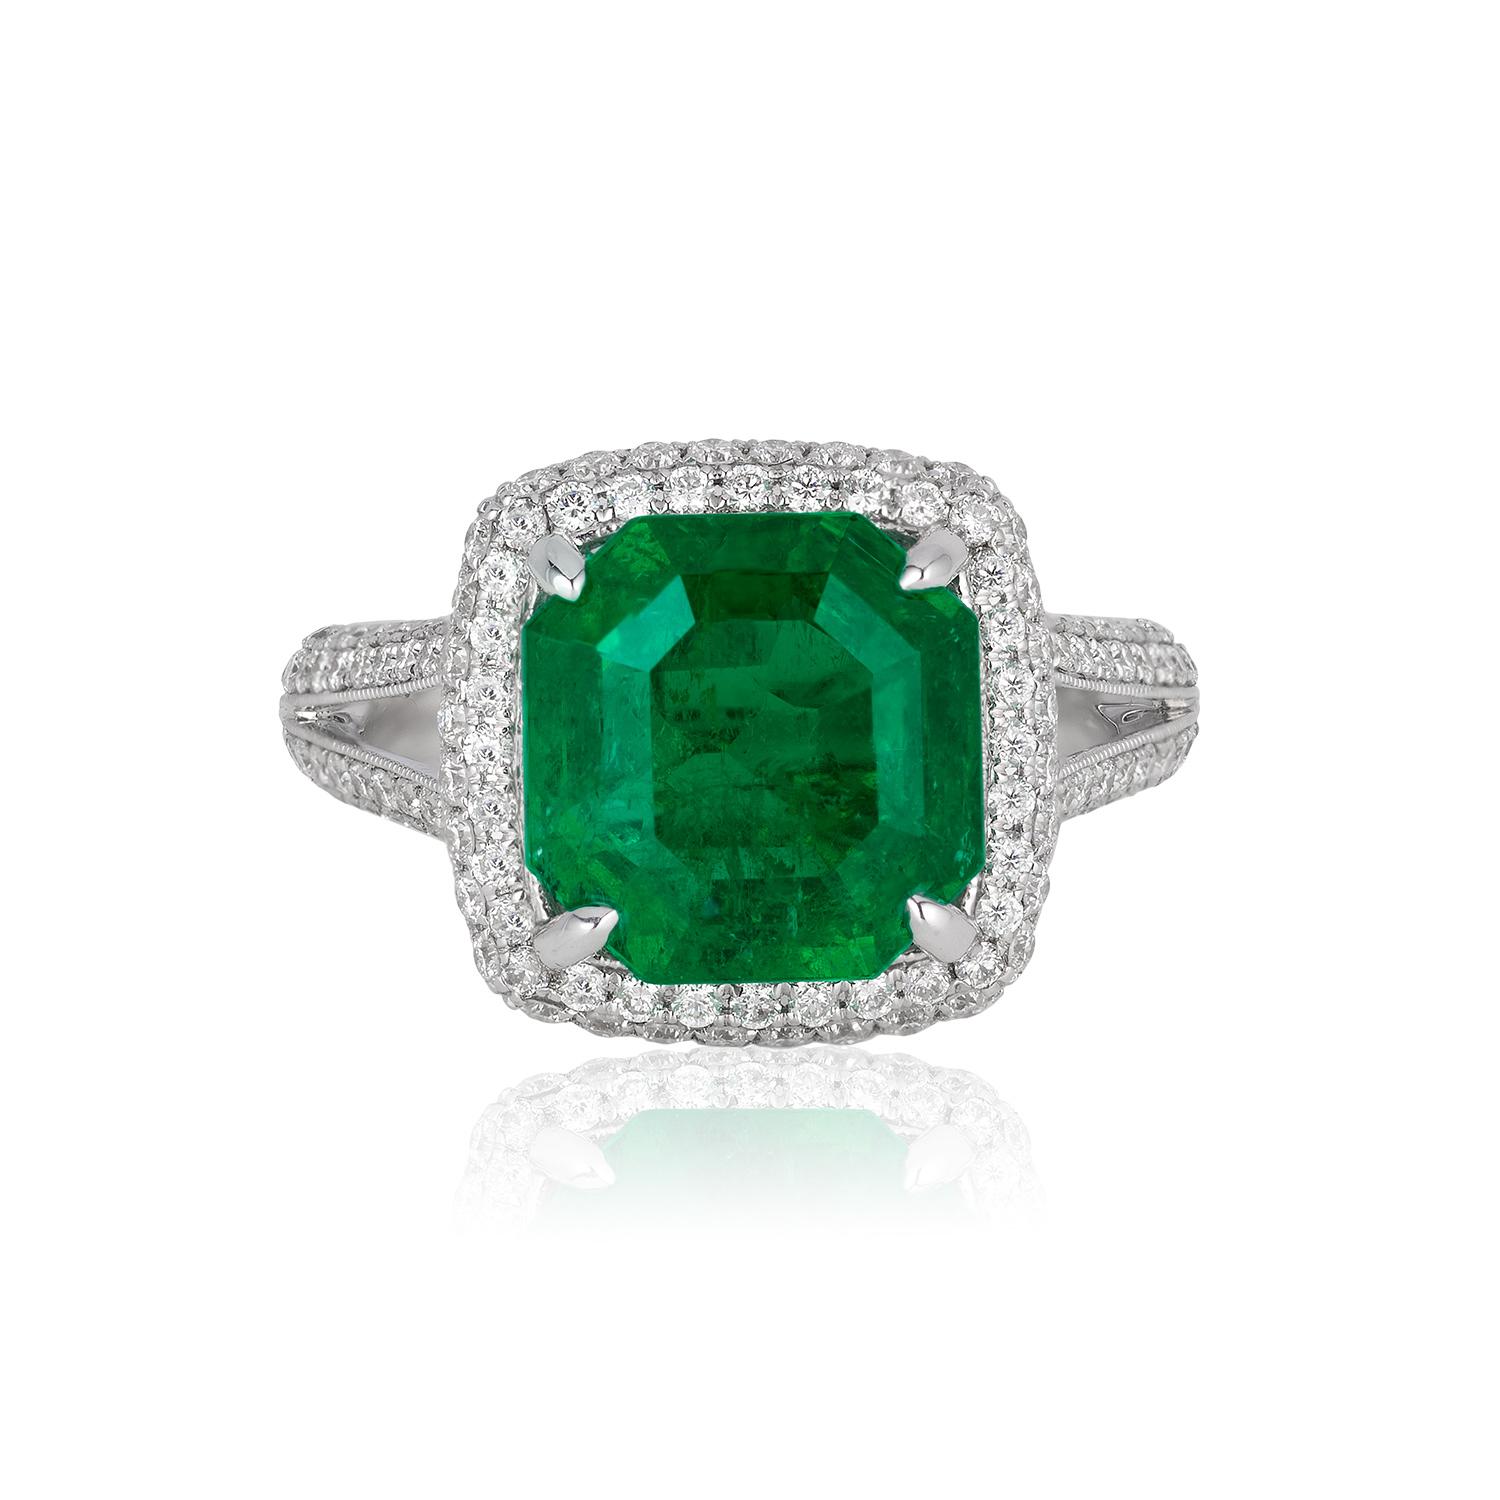 Andreoli 4.17 Carat Emerald Diamond 18 Karat White Gold Ring CDC Certified 

This ring features:
- 1.34 Carat Round Diamond
- 4.17 Carat Colombian Emerald
- 6.74 Gram 18k Gold
- Made In Italy